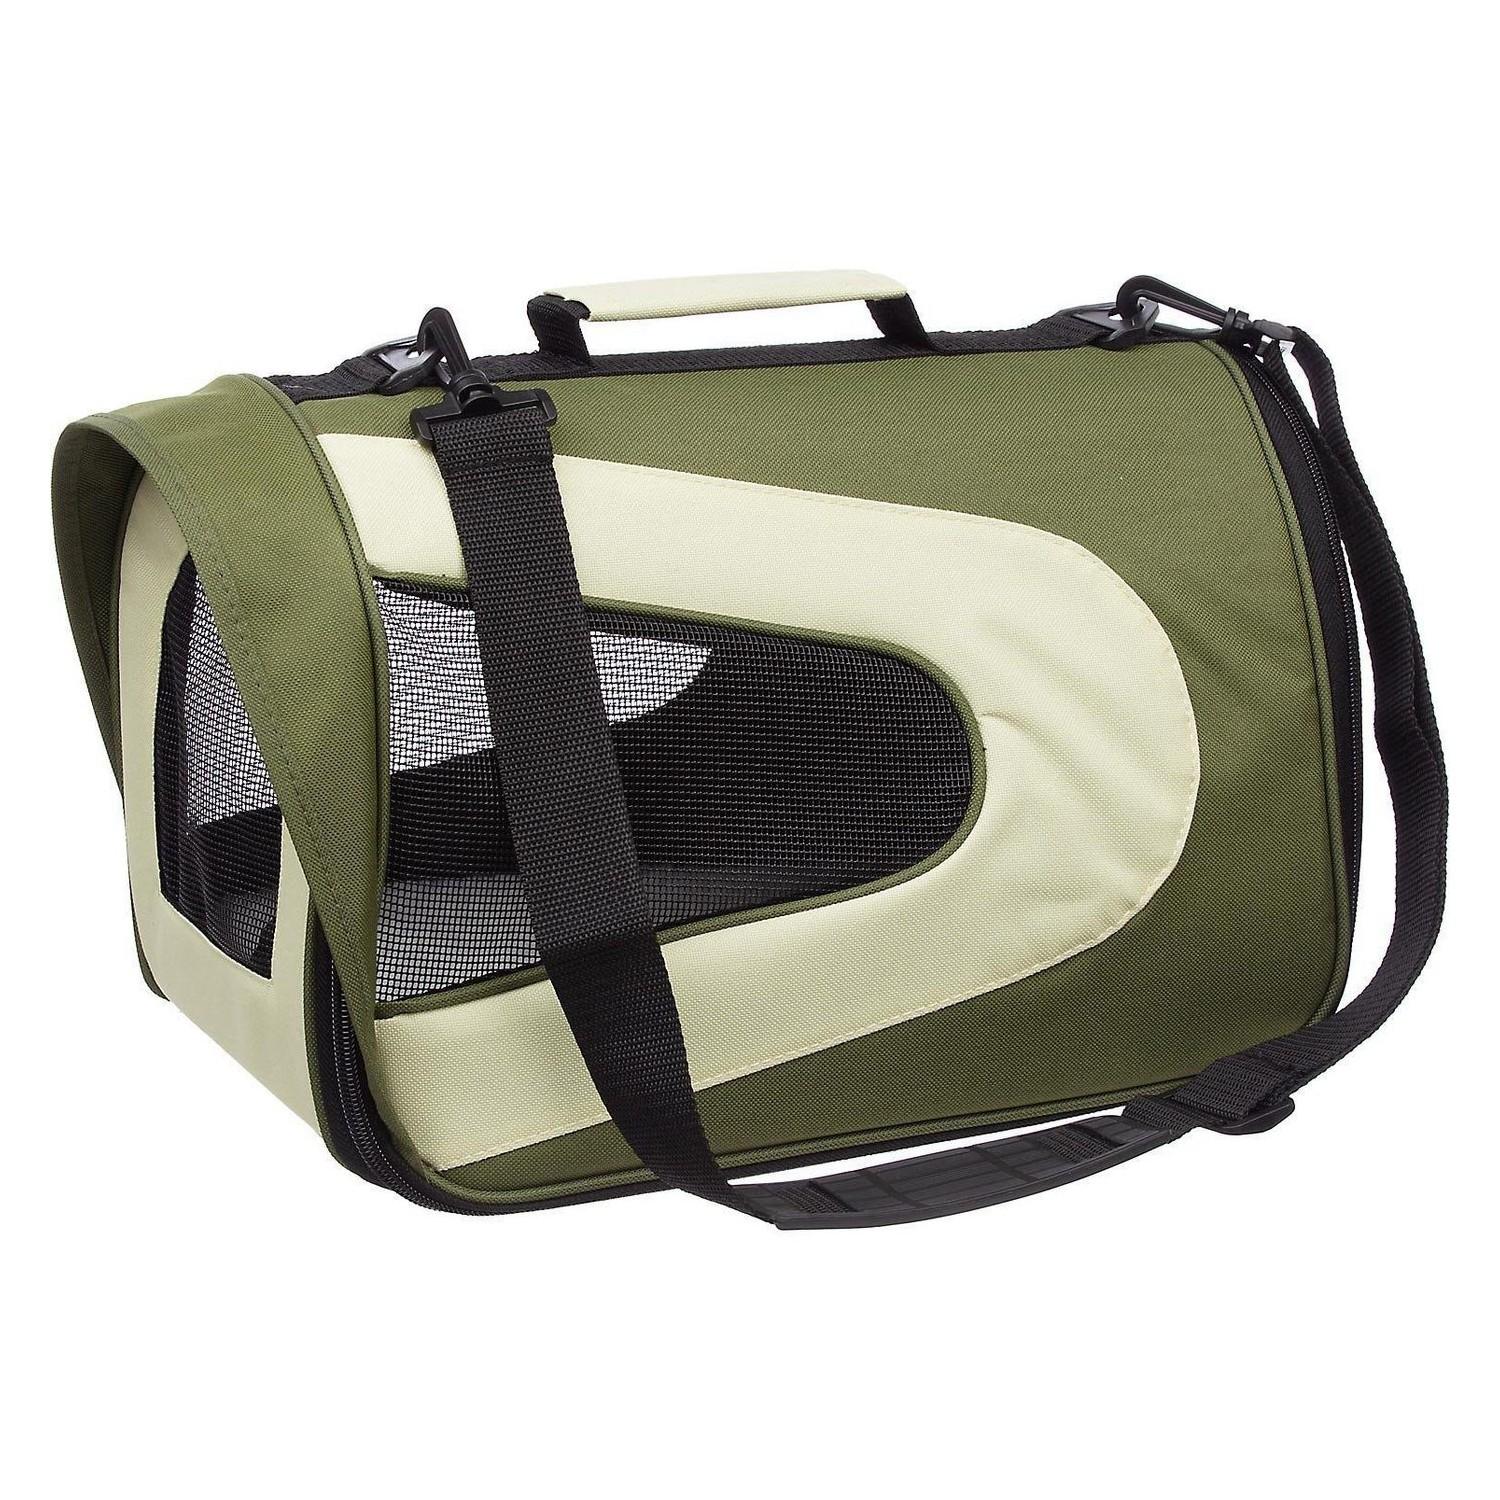 Pet Life Sporty Mesh Collapsible Dog Carrier - Green/Khaki